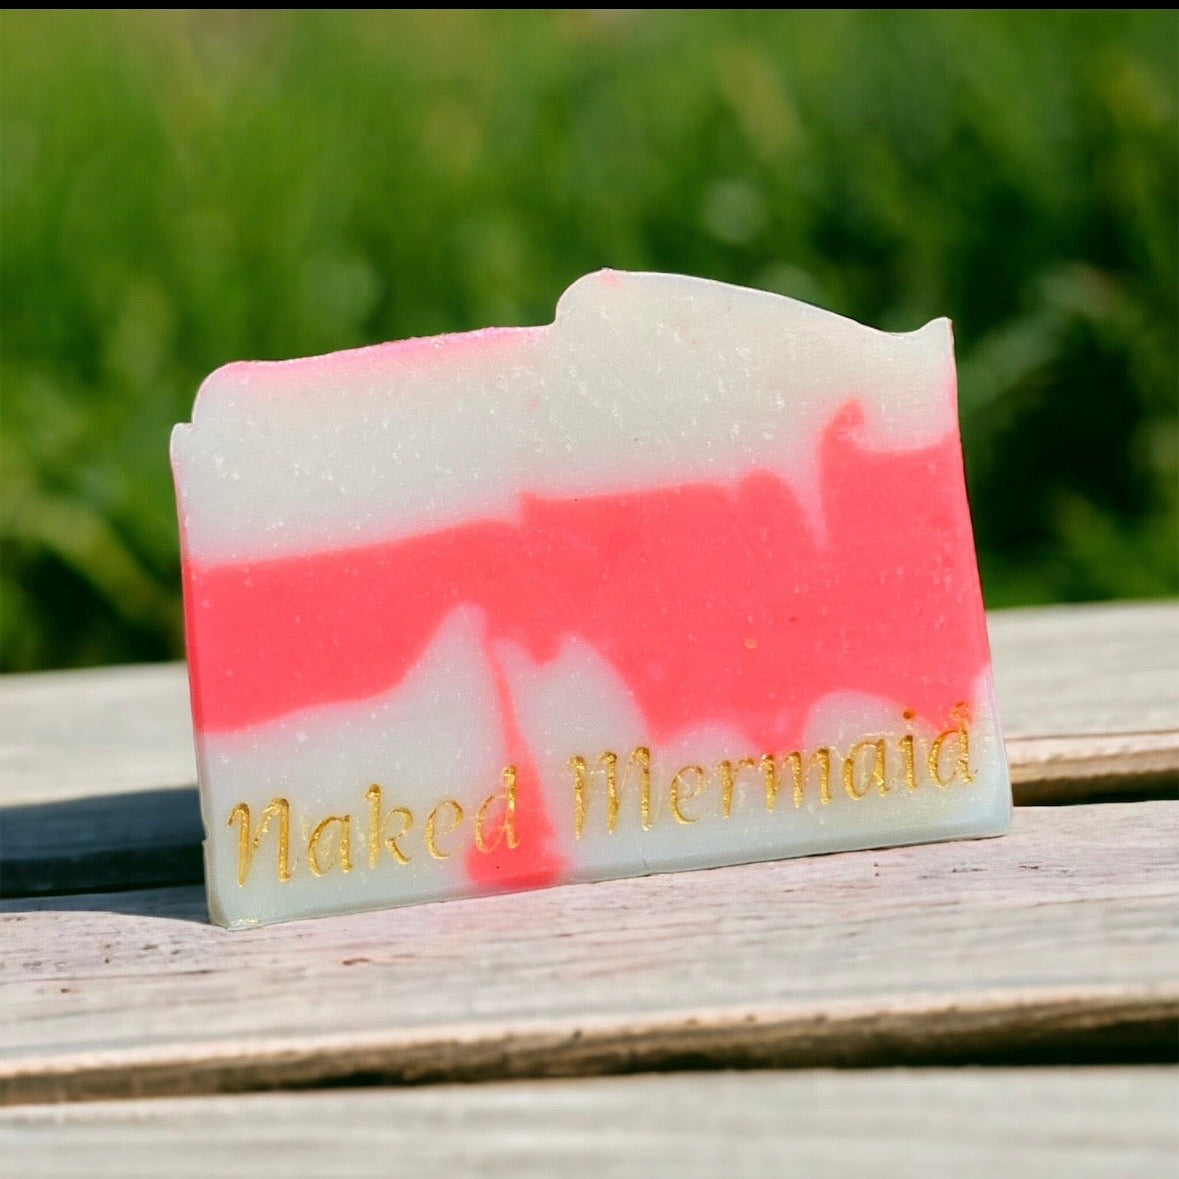 Handcrafted Natural Soap Bars